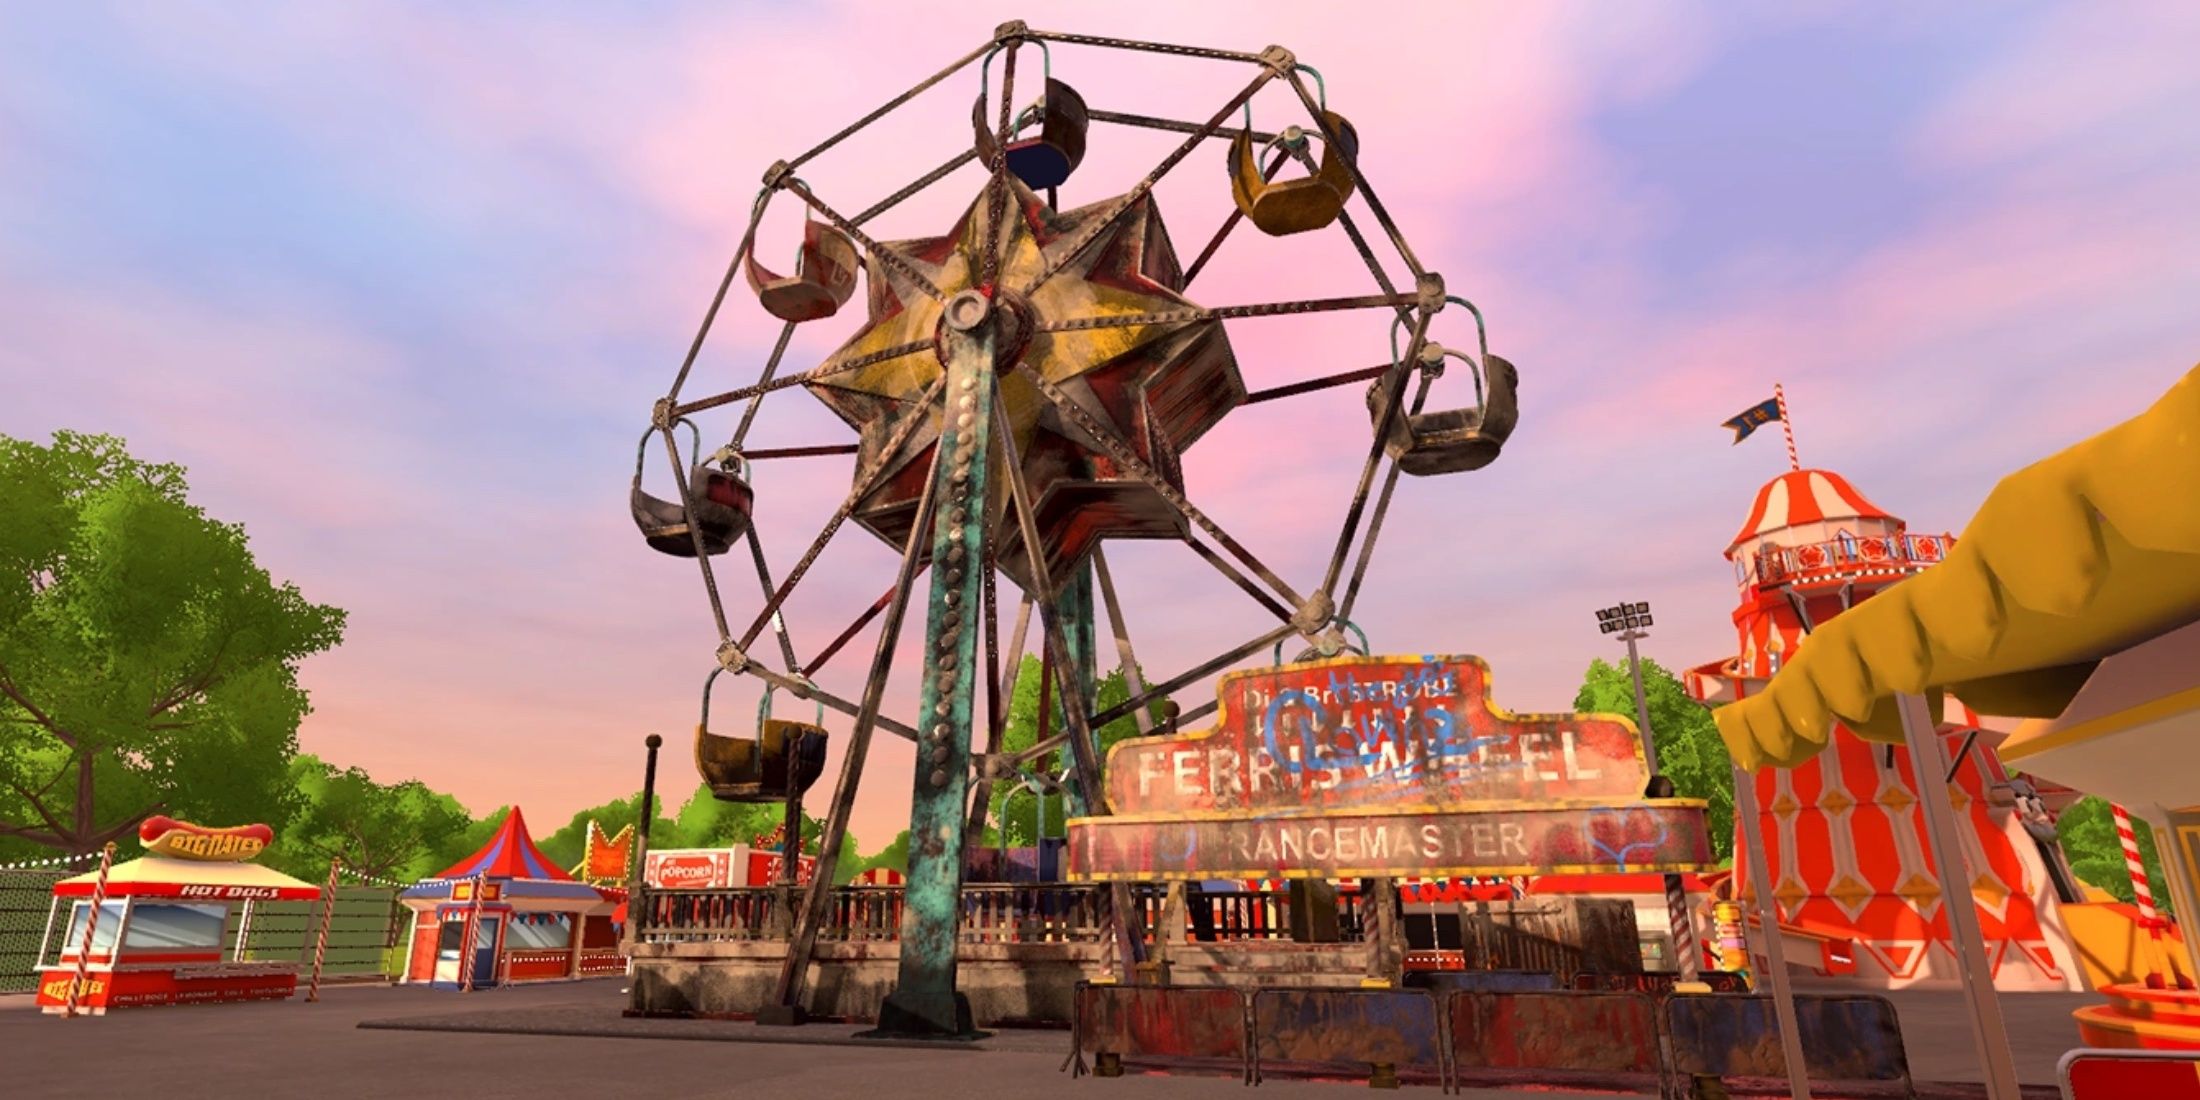 The filthy Ferris Wheel turns slowly in an empty theme park.